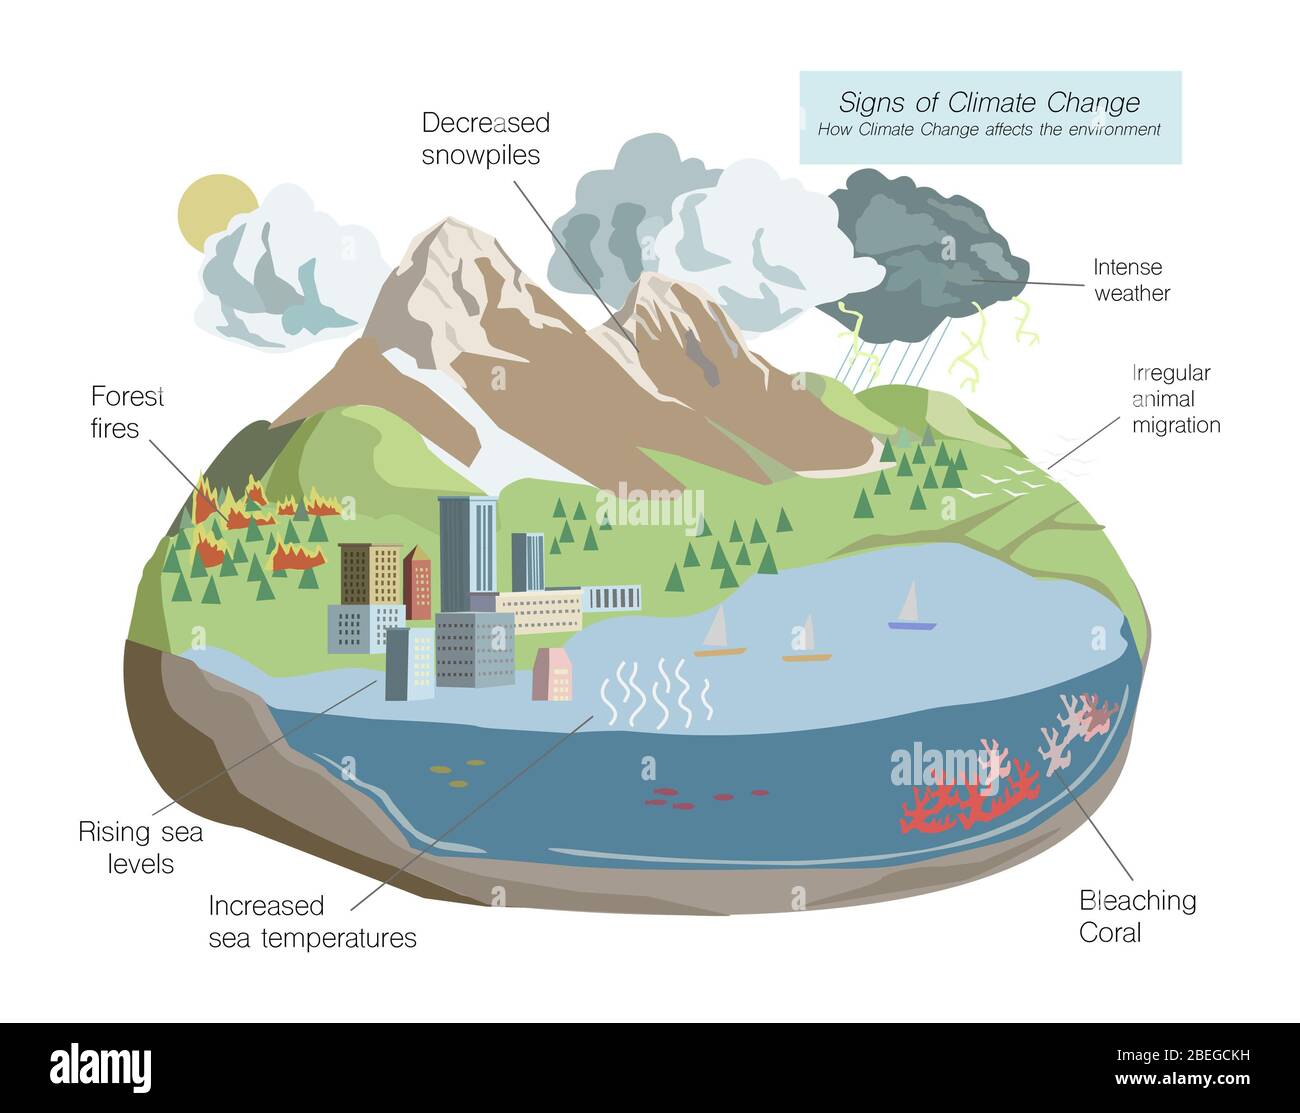 Illustration showing the effects of climate change on different aspects of the environment. Stock Photo